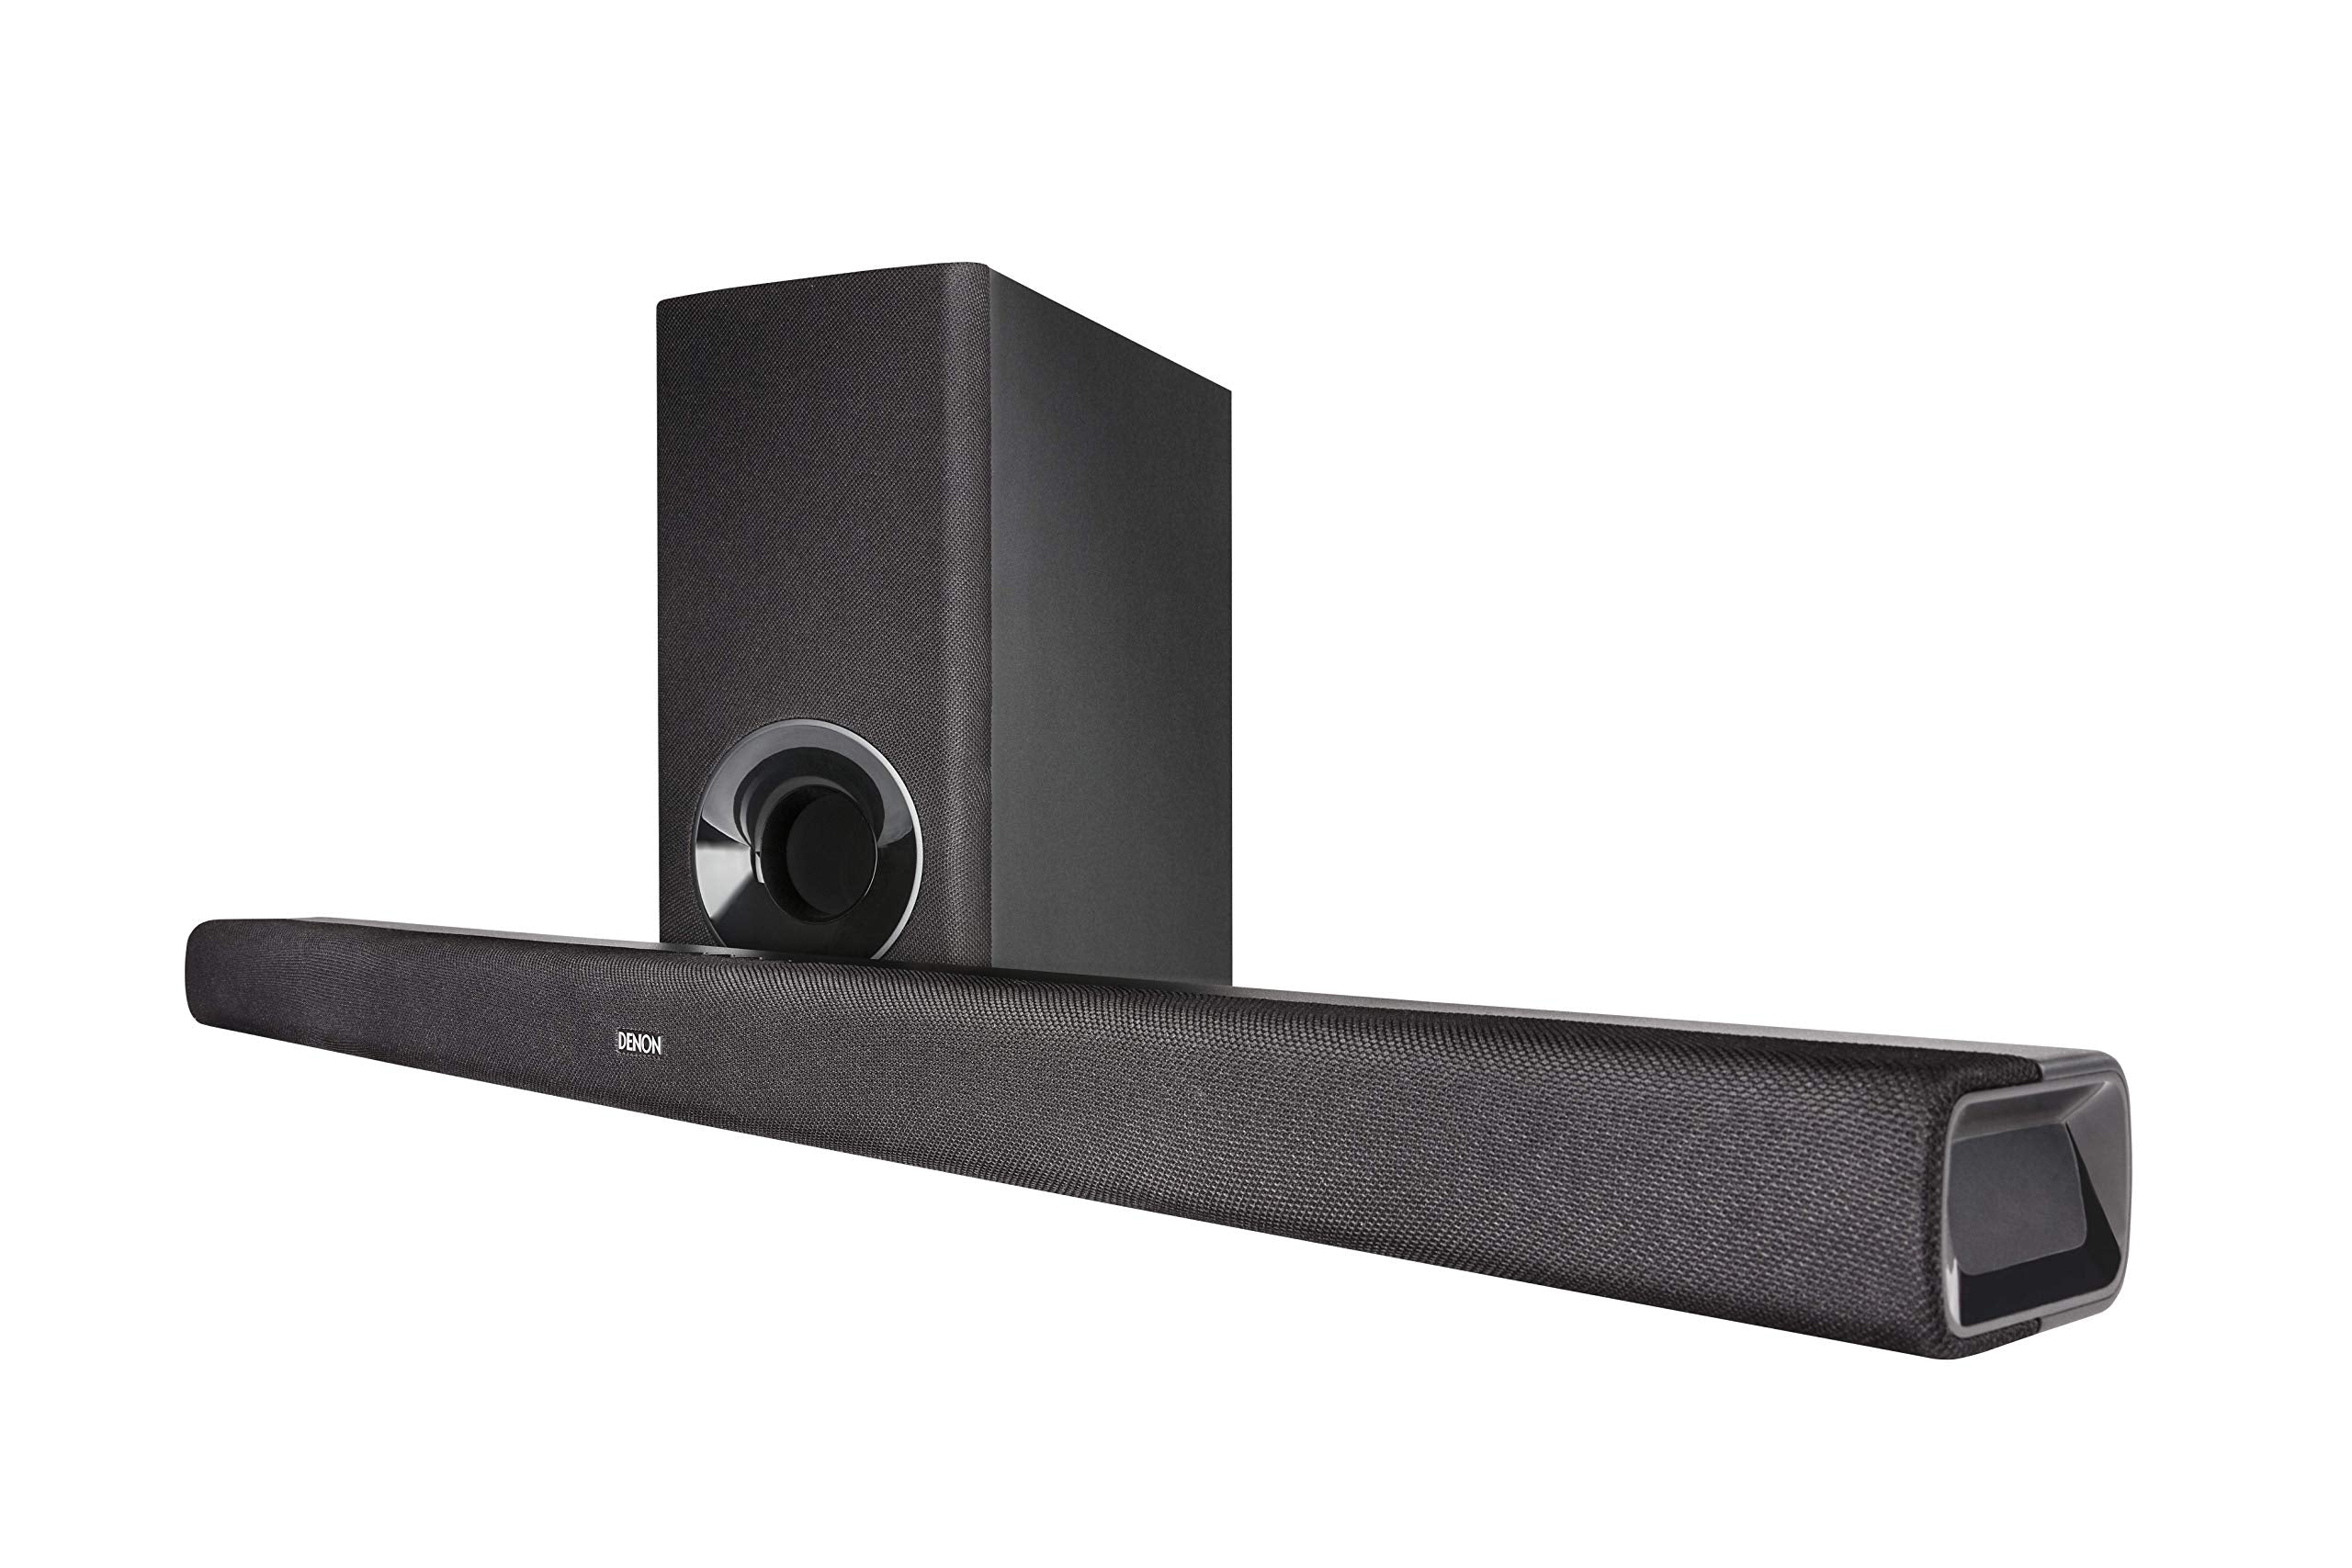 Denon DHT-S316 Soundbar with Subwoofer, Bluetooth Sound Bar for Surround Sound System, Dolby Digital, DTS Decoding, Dialogue Enhancer, HDMI ARC, Wall Mountable, Music Streaming, Including HDMI Cable